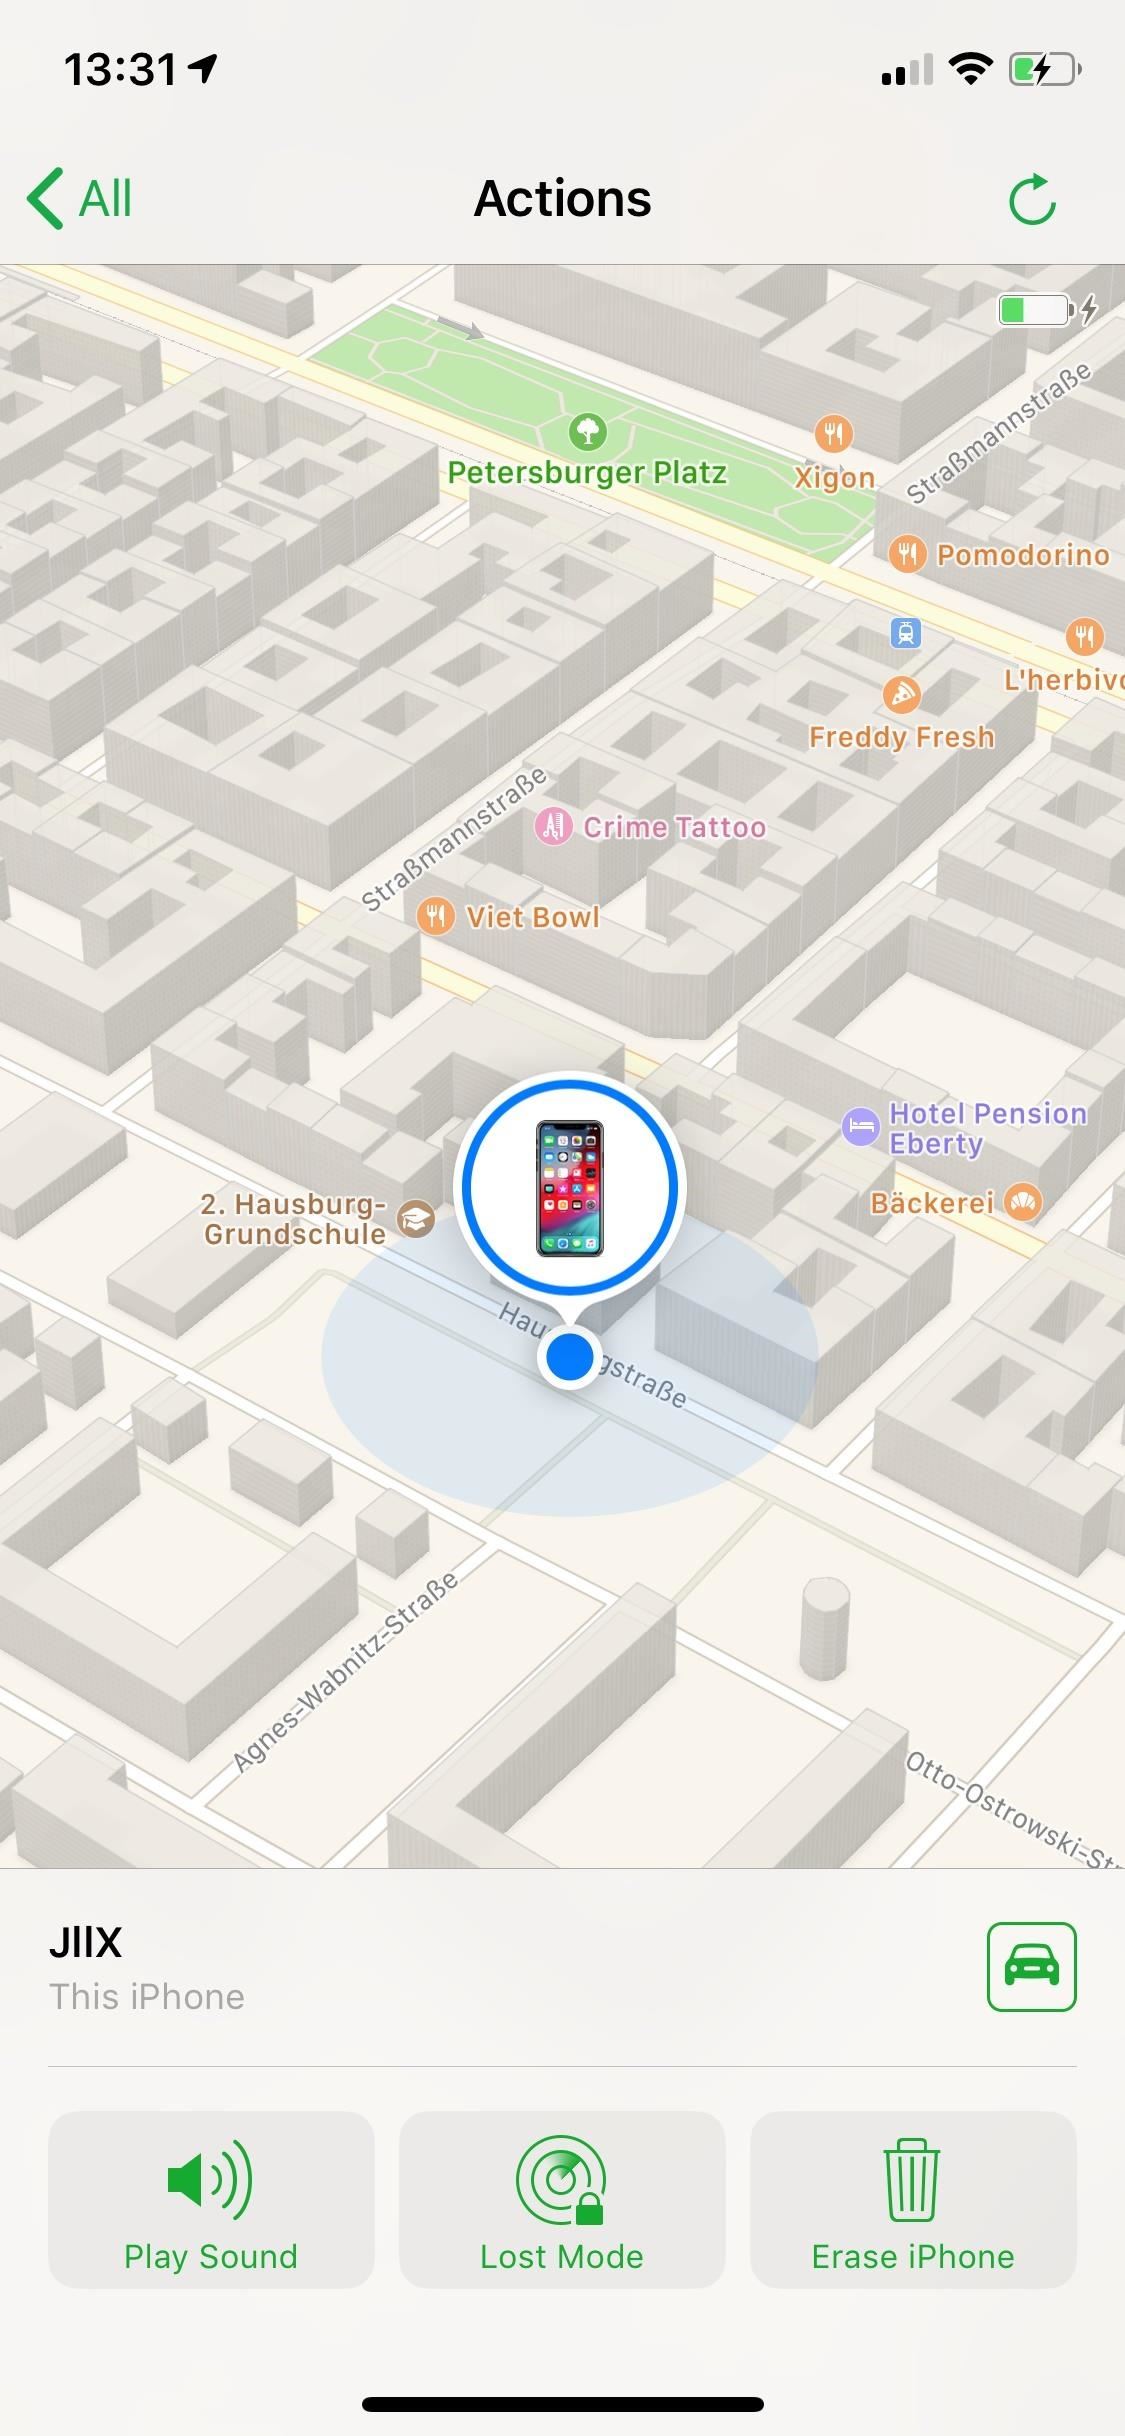 What to Do After Your iPhone Is Lost or Stolen — The Ultimate Guide